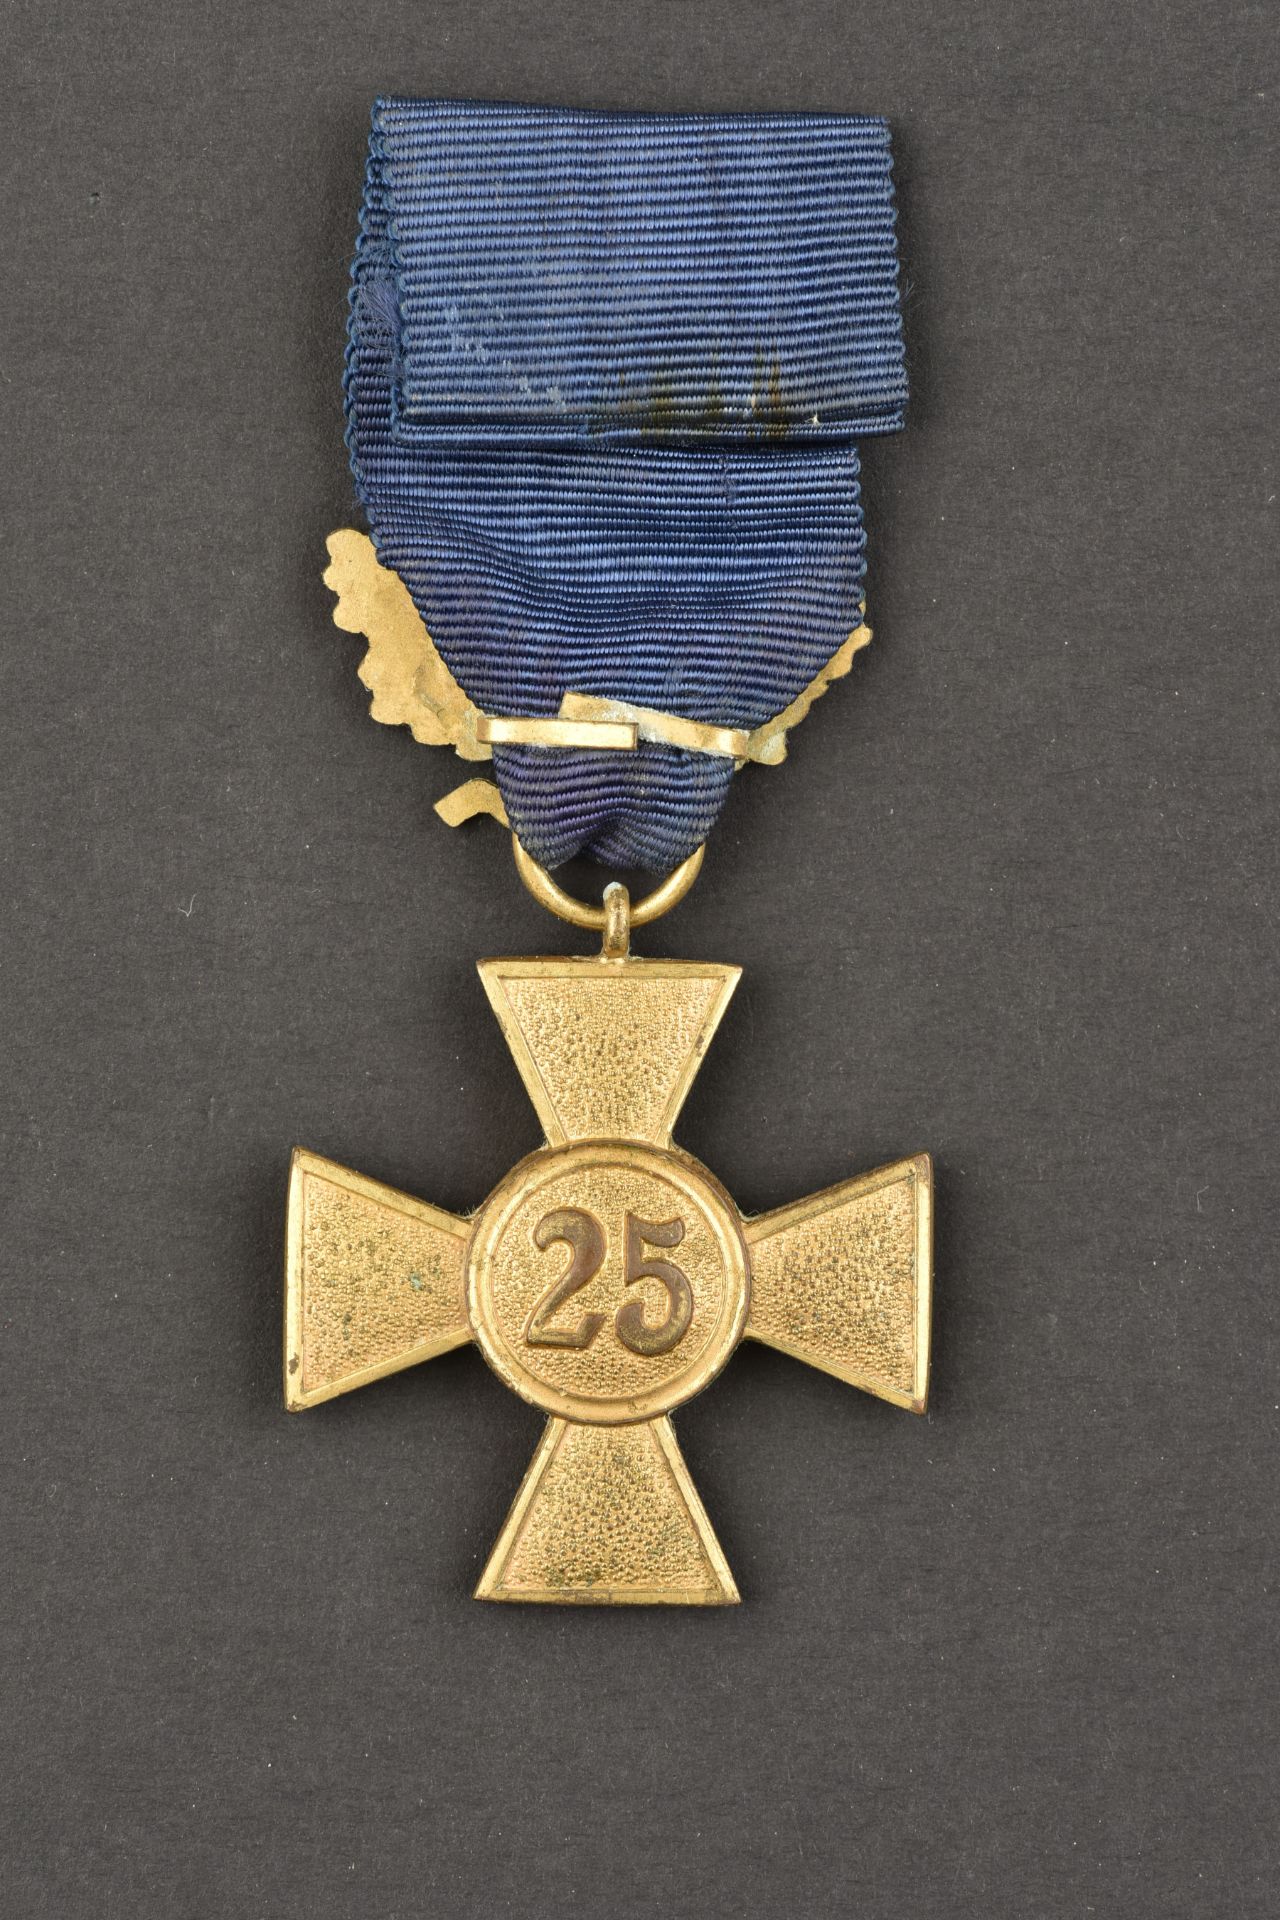 Medaille service LW. LW service medal. - Image 3 of 3